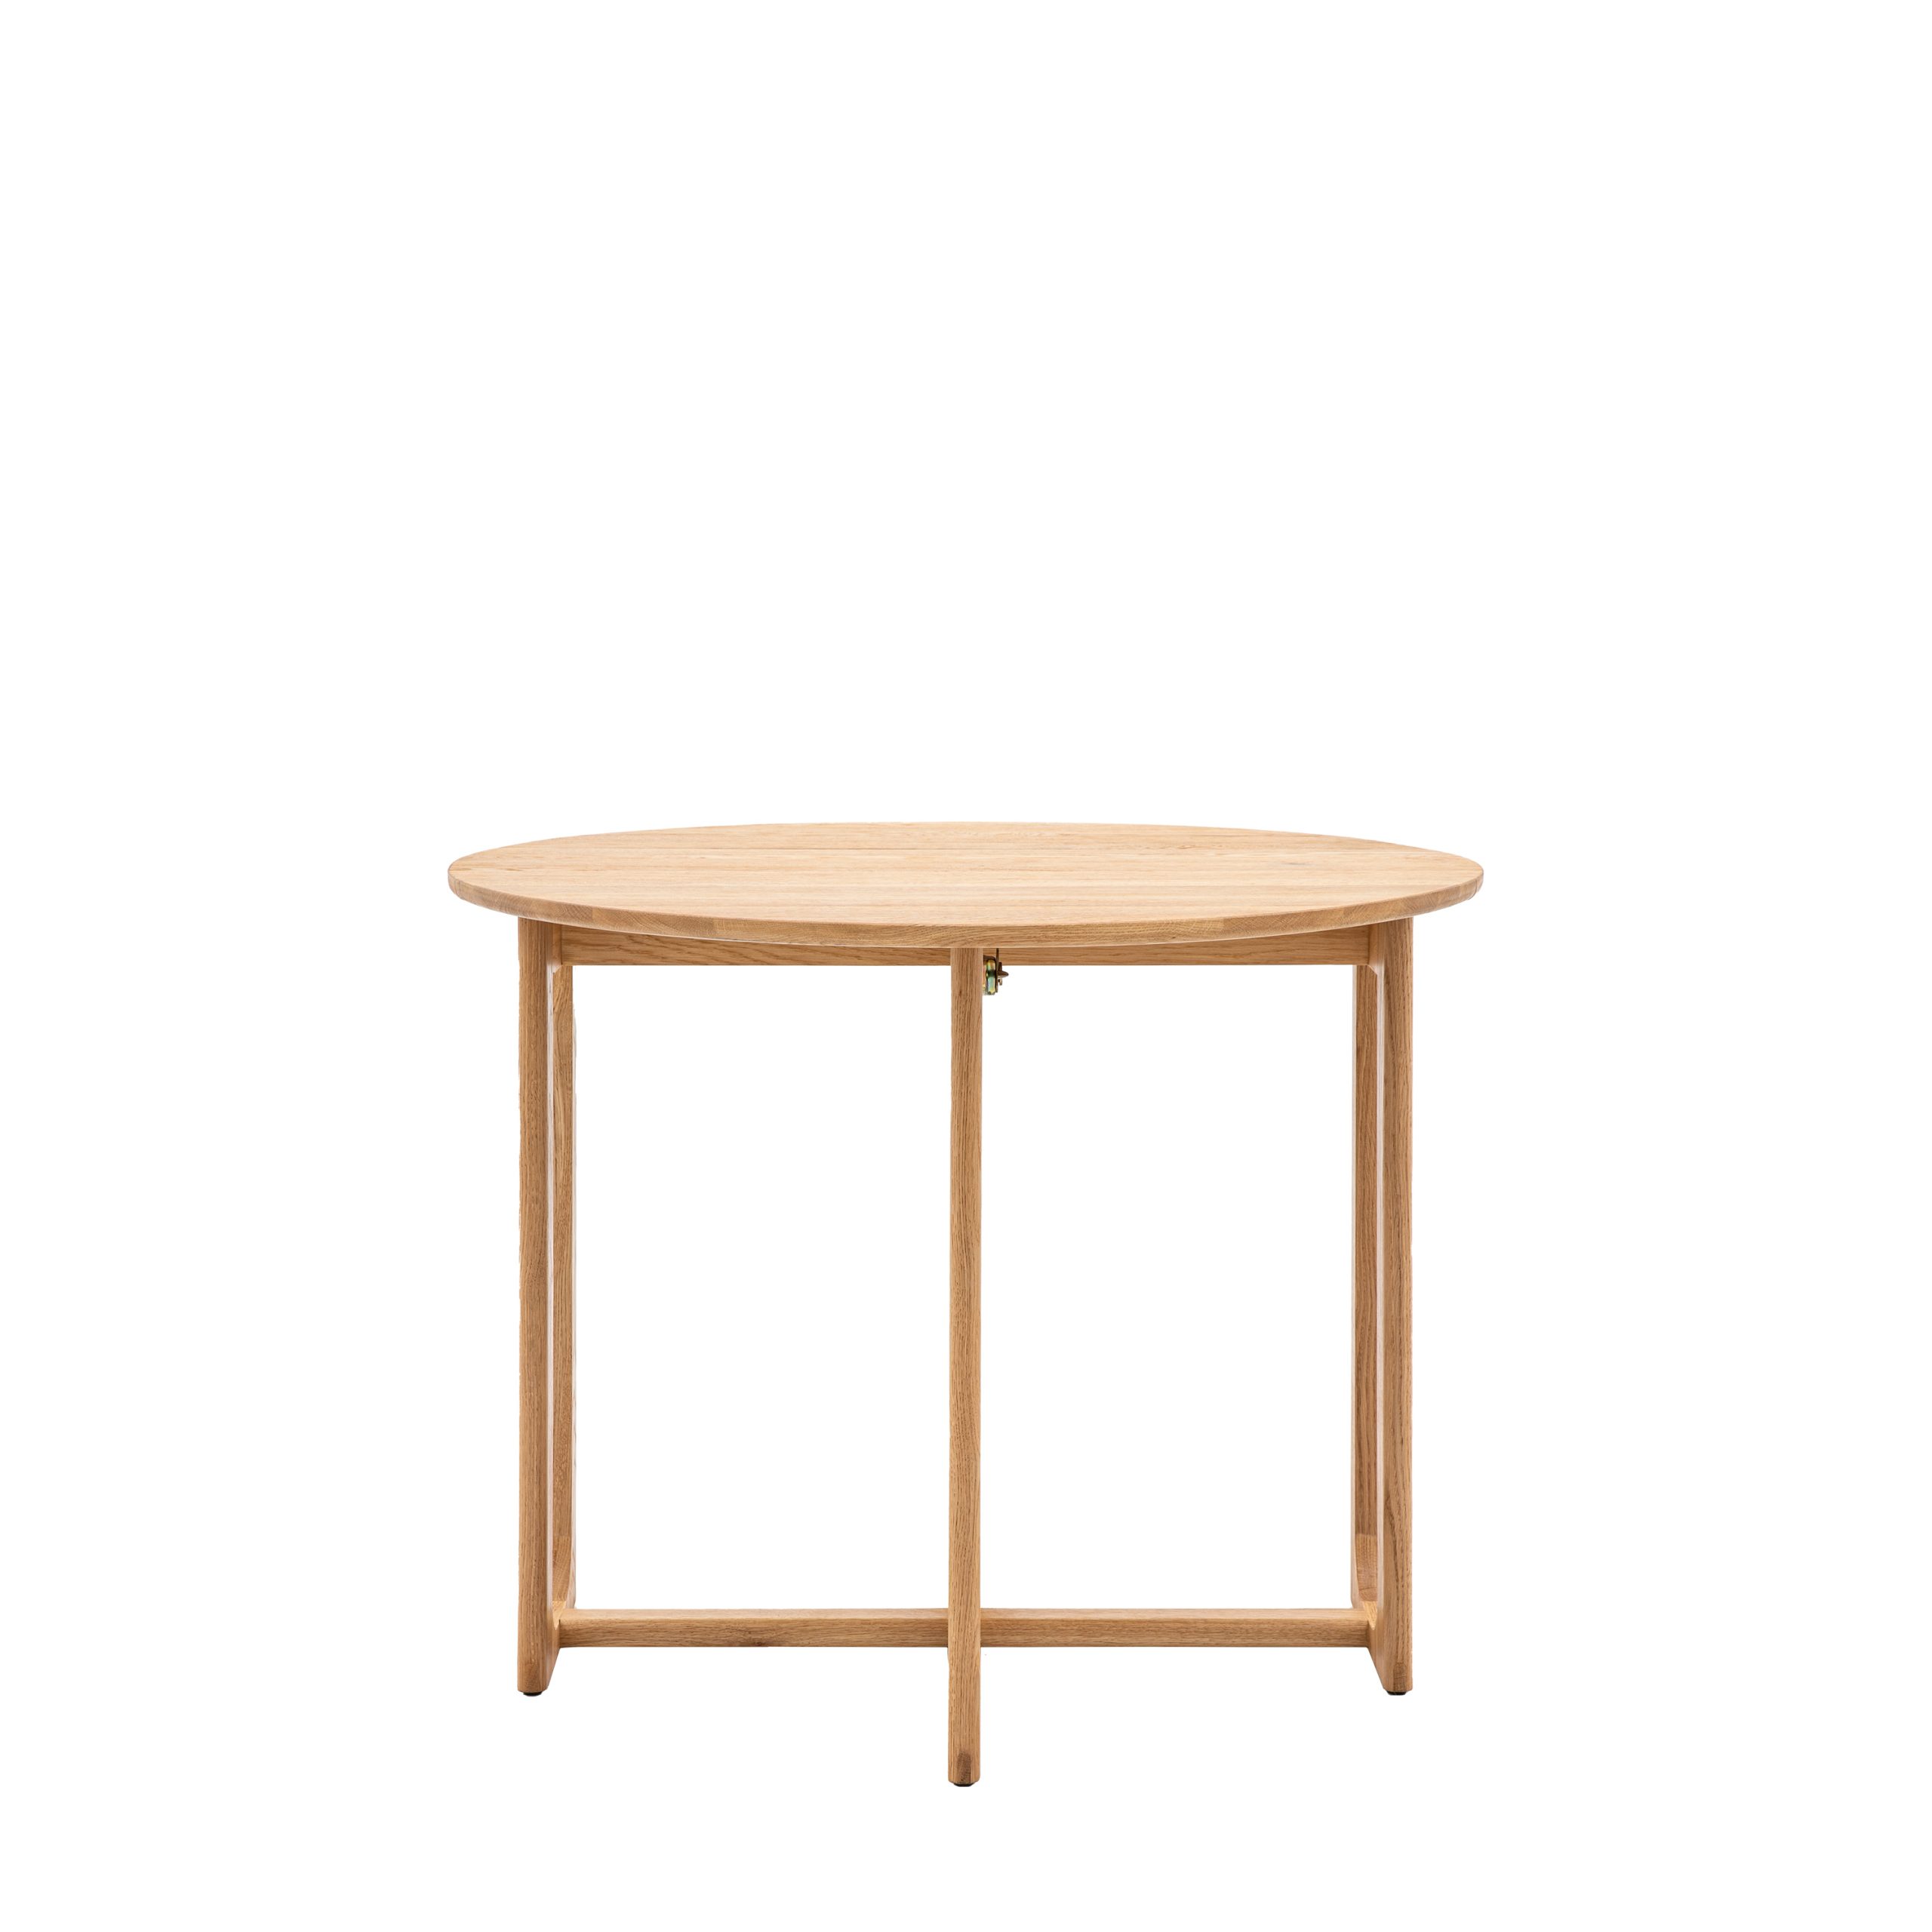 Gallery Direct Craft Folding Dining Table Natural